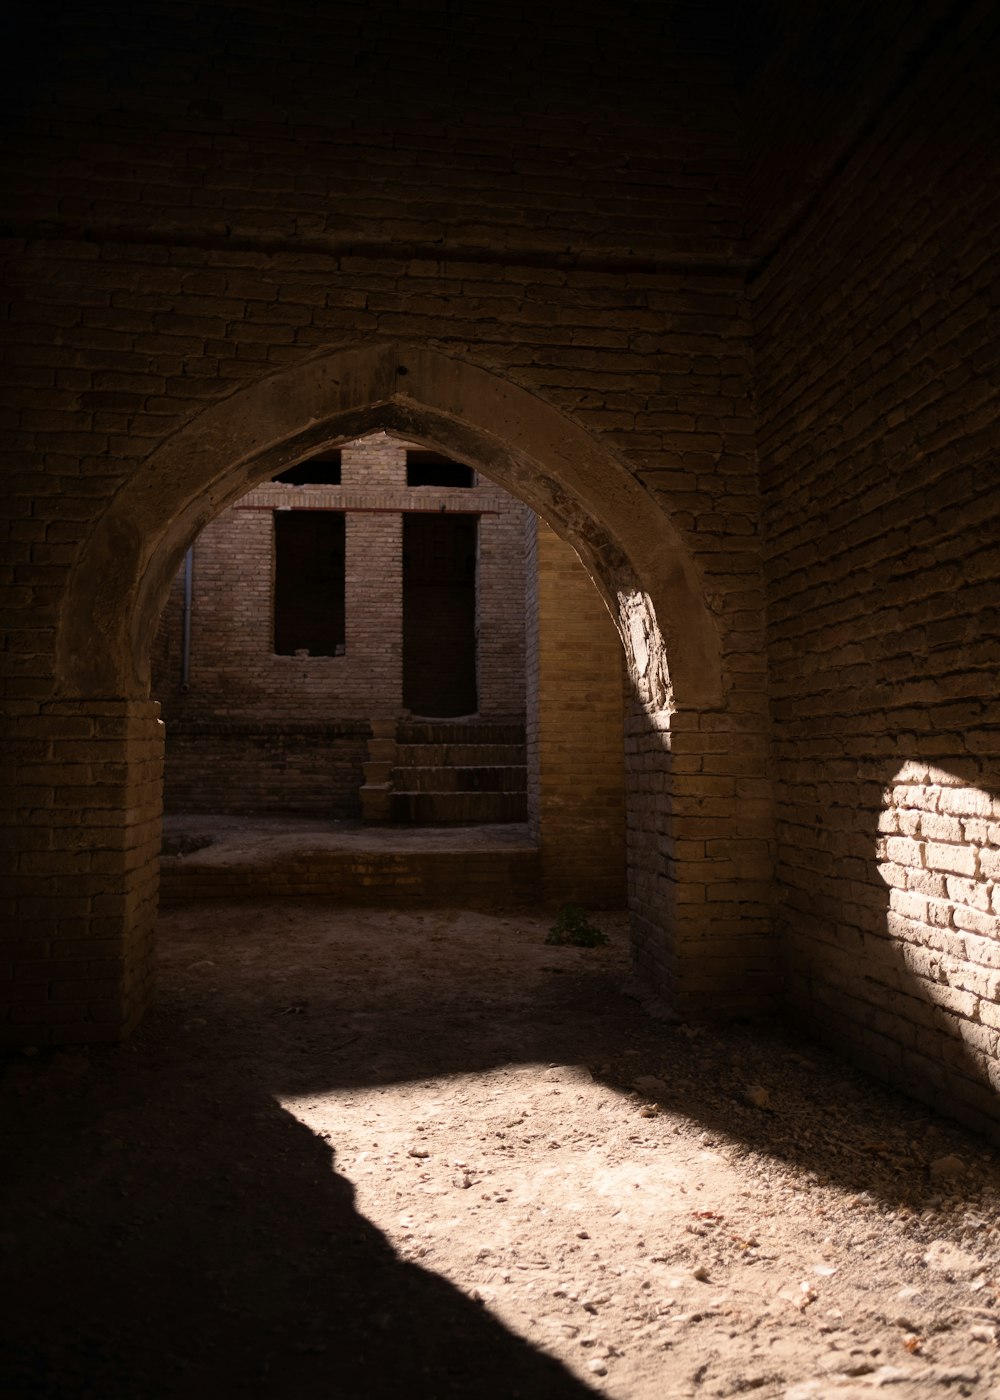 an archway in a brick building with sunlight coming through